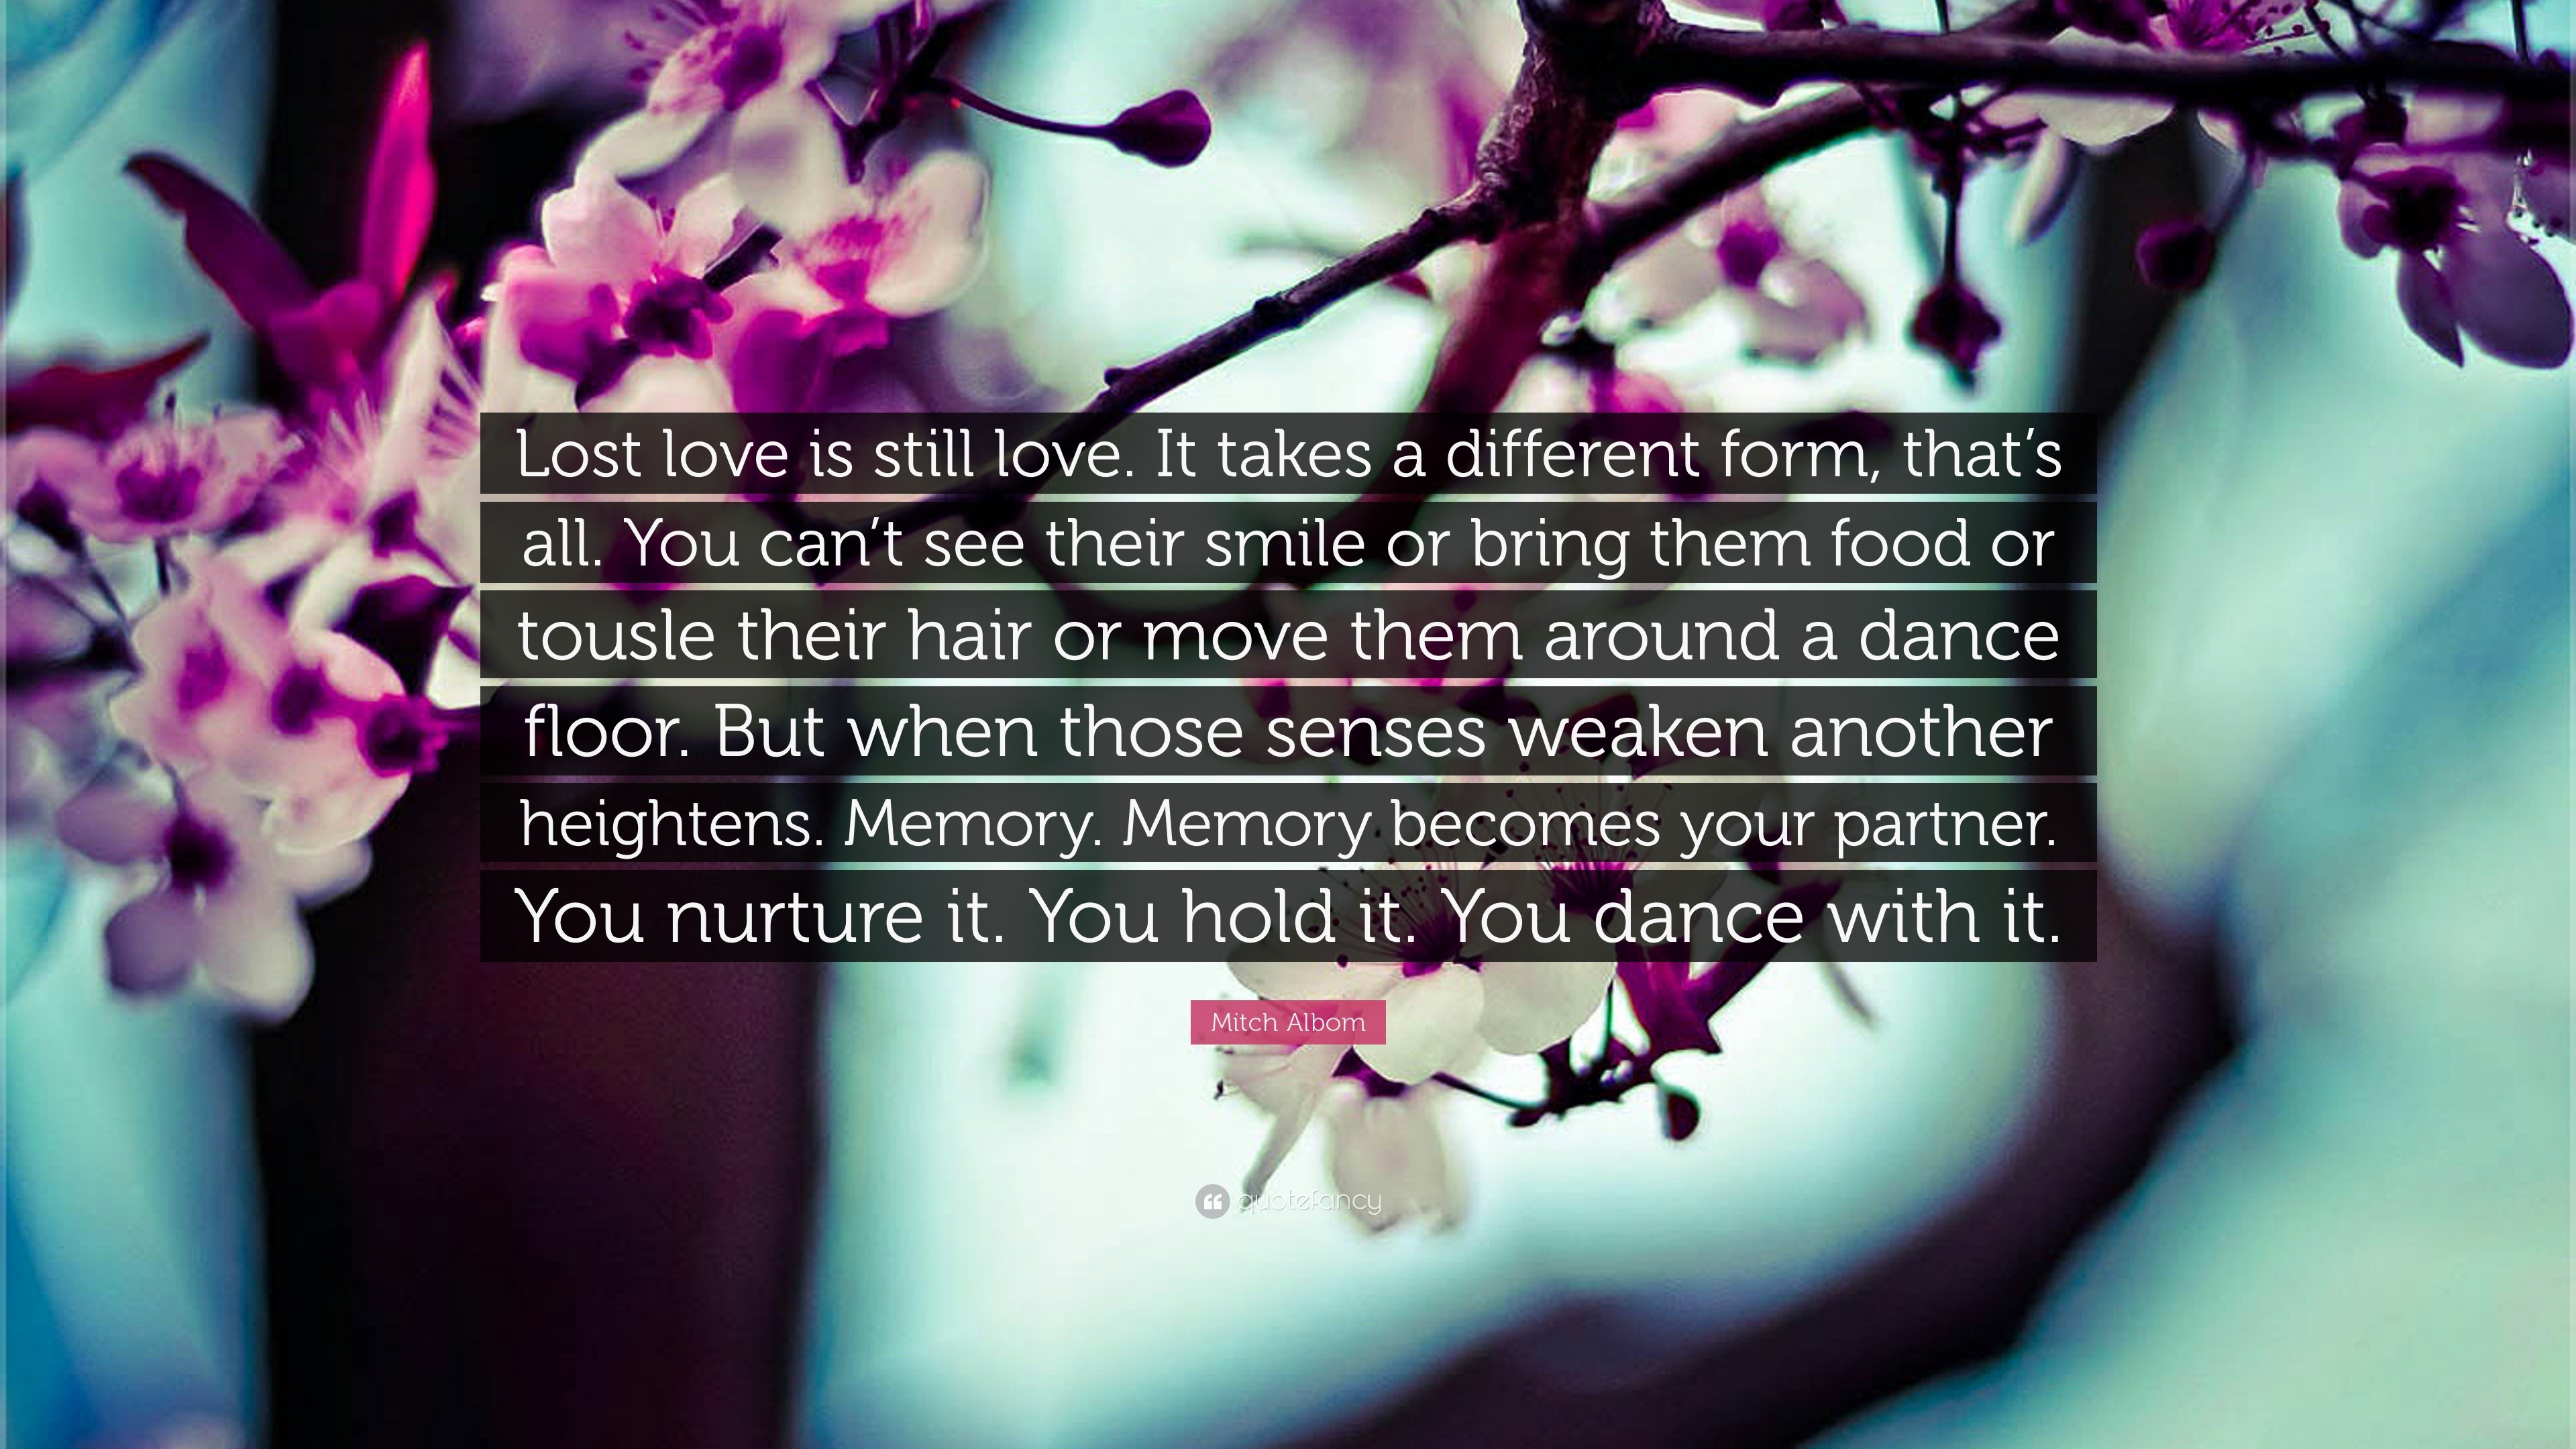 Moving Quotes “Lost love is still love It takes a different form